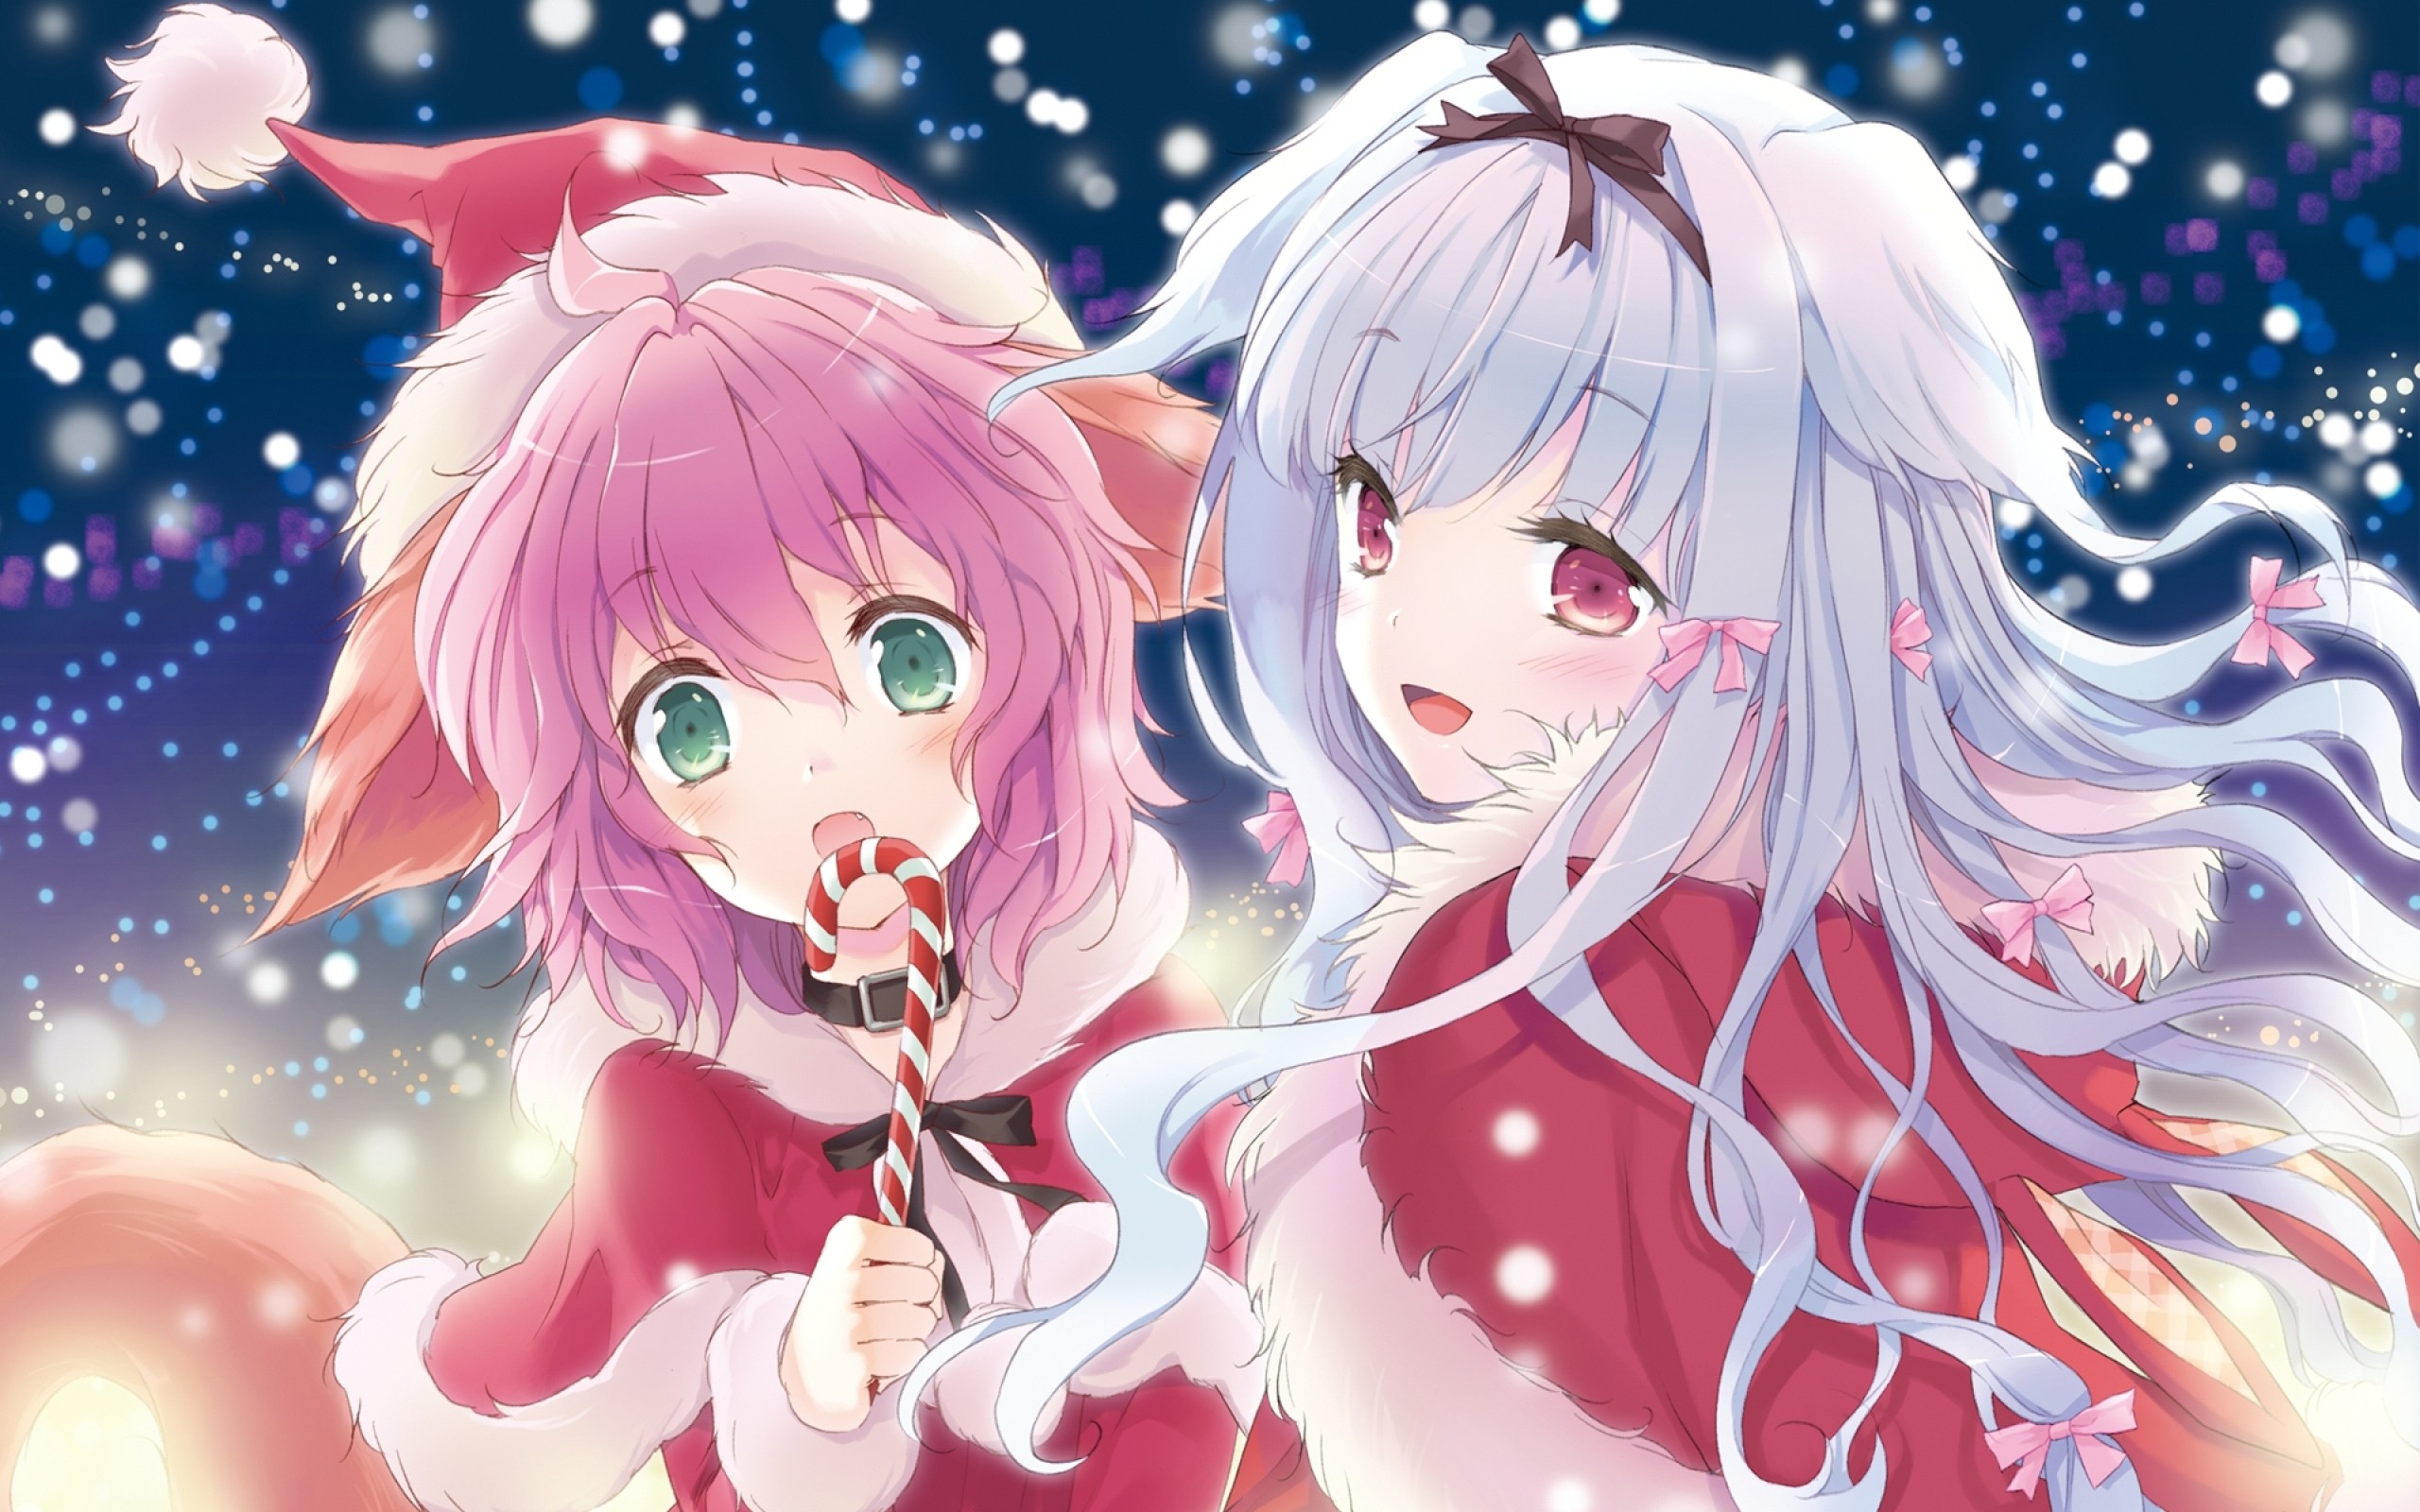 Anime Christmas wallpaper ·① Download free awesome HD backgrounds for desktop, mobile, laptop in ...